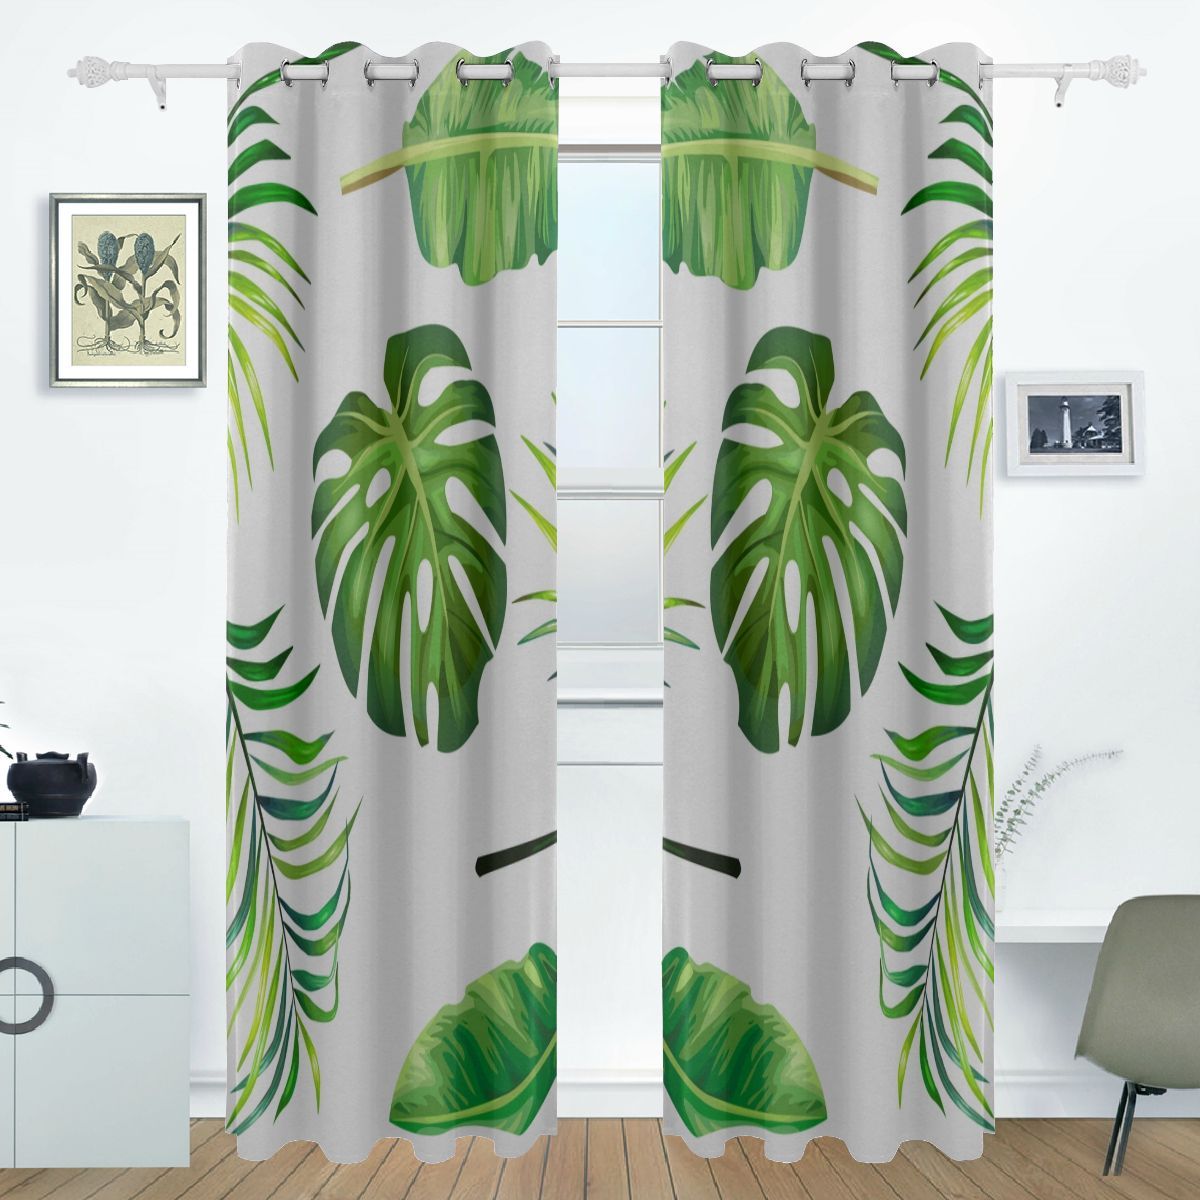 Childrens Blackout Curtains Tropical Graphic Palm Green Leaves Print ...